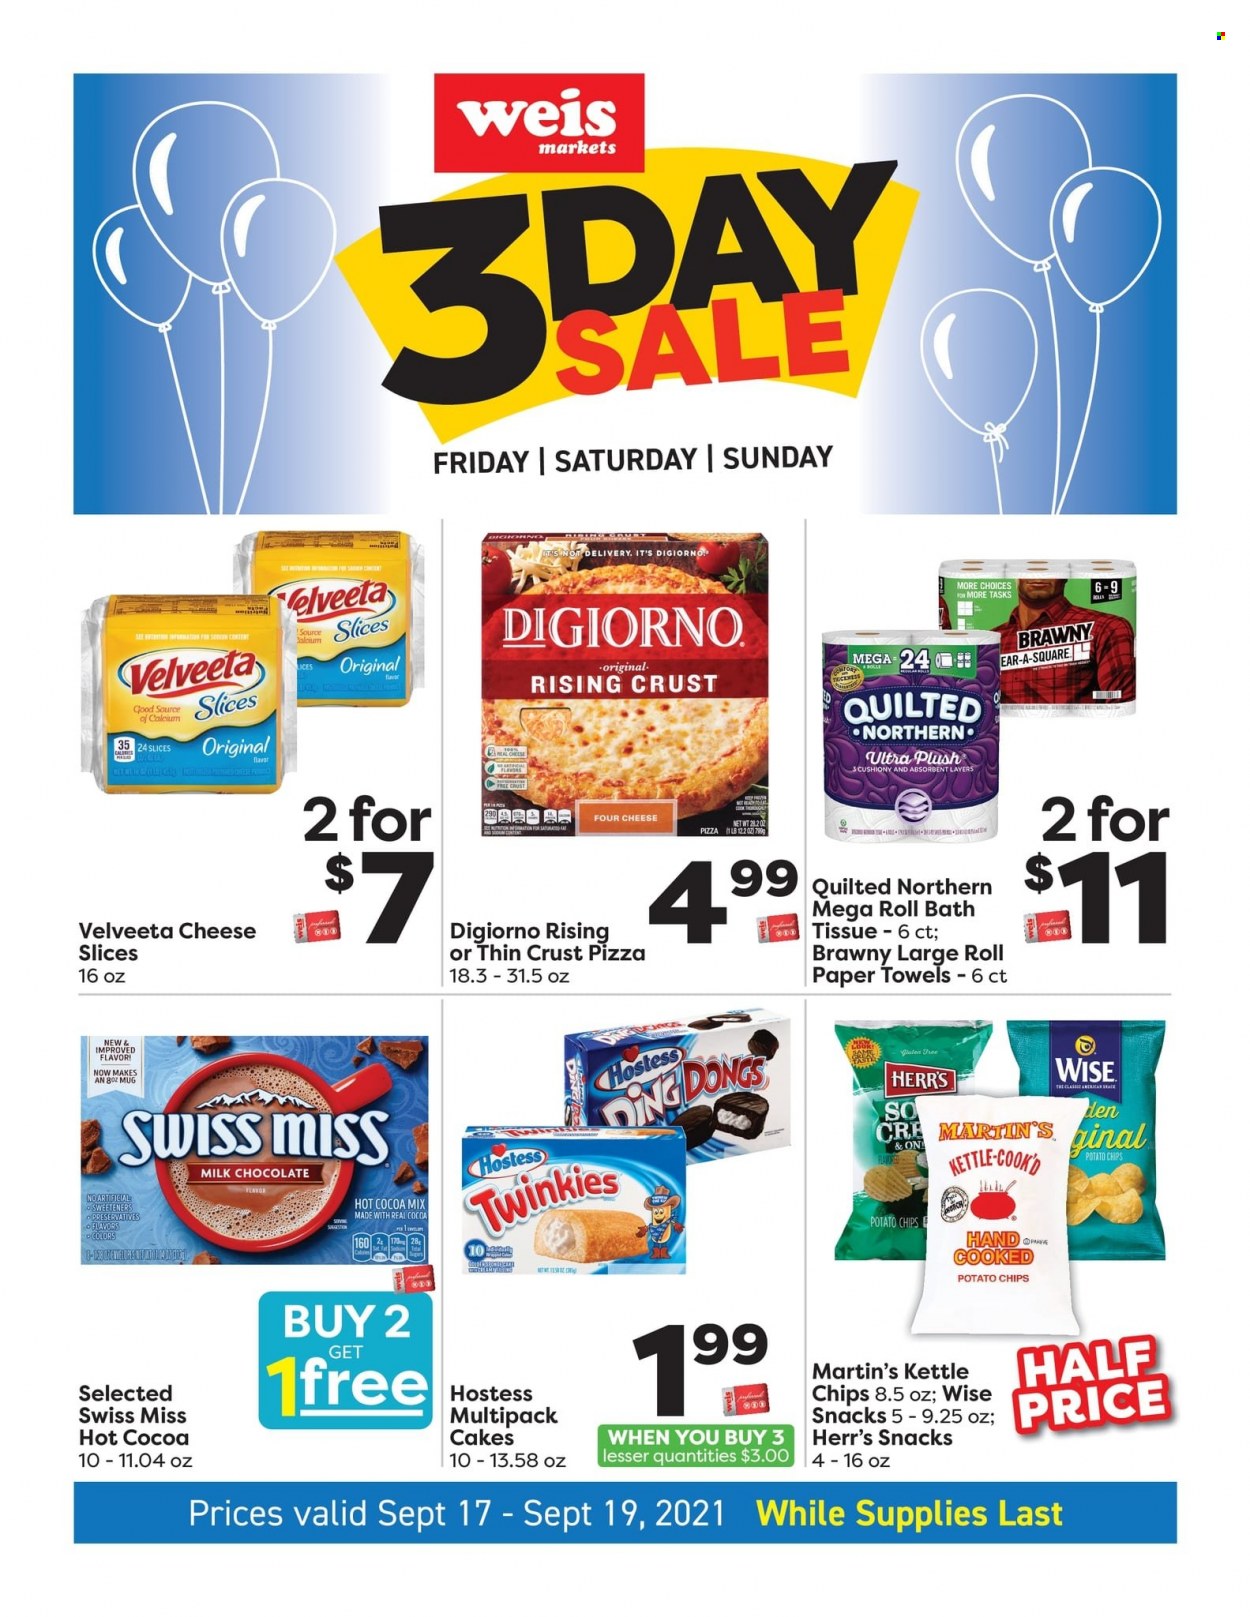 thumbnail - Weis Flyer - 09/17/2021 - 09/19/2021 - Sales products - cake, pizza, sliced cheese, Swiss Miss, milk chocolate, chocolate, snack, potato chips, chips, hot cocoa, Ron Pelicano, bath tissue, Quilted Northern, kitchen towels, paper towels, mug. Page 1.